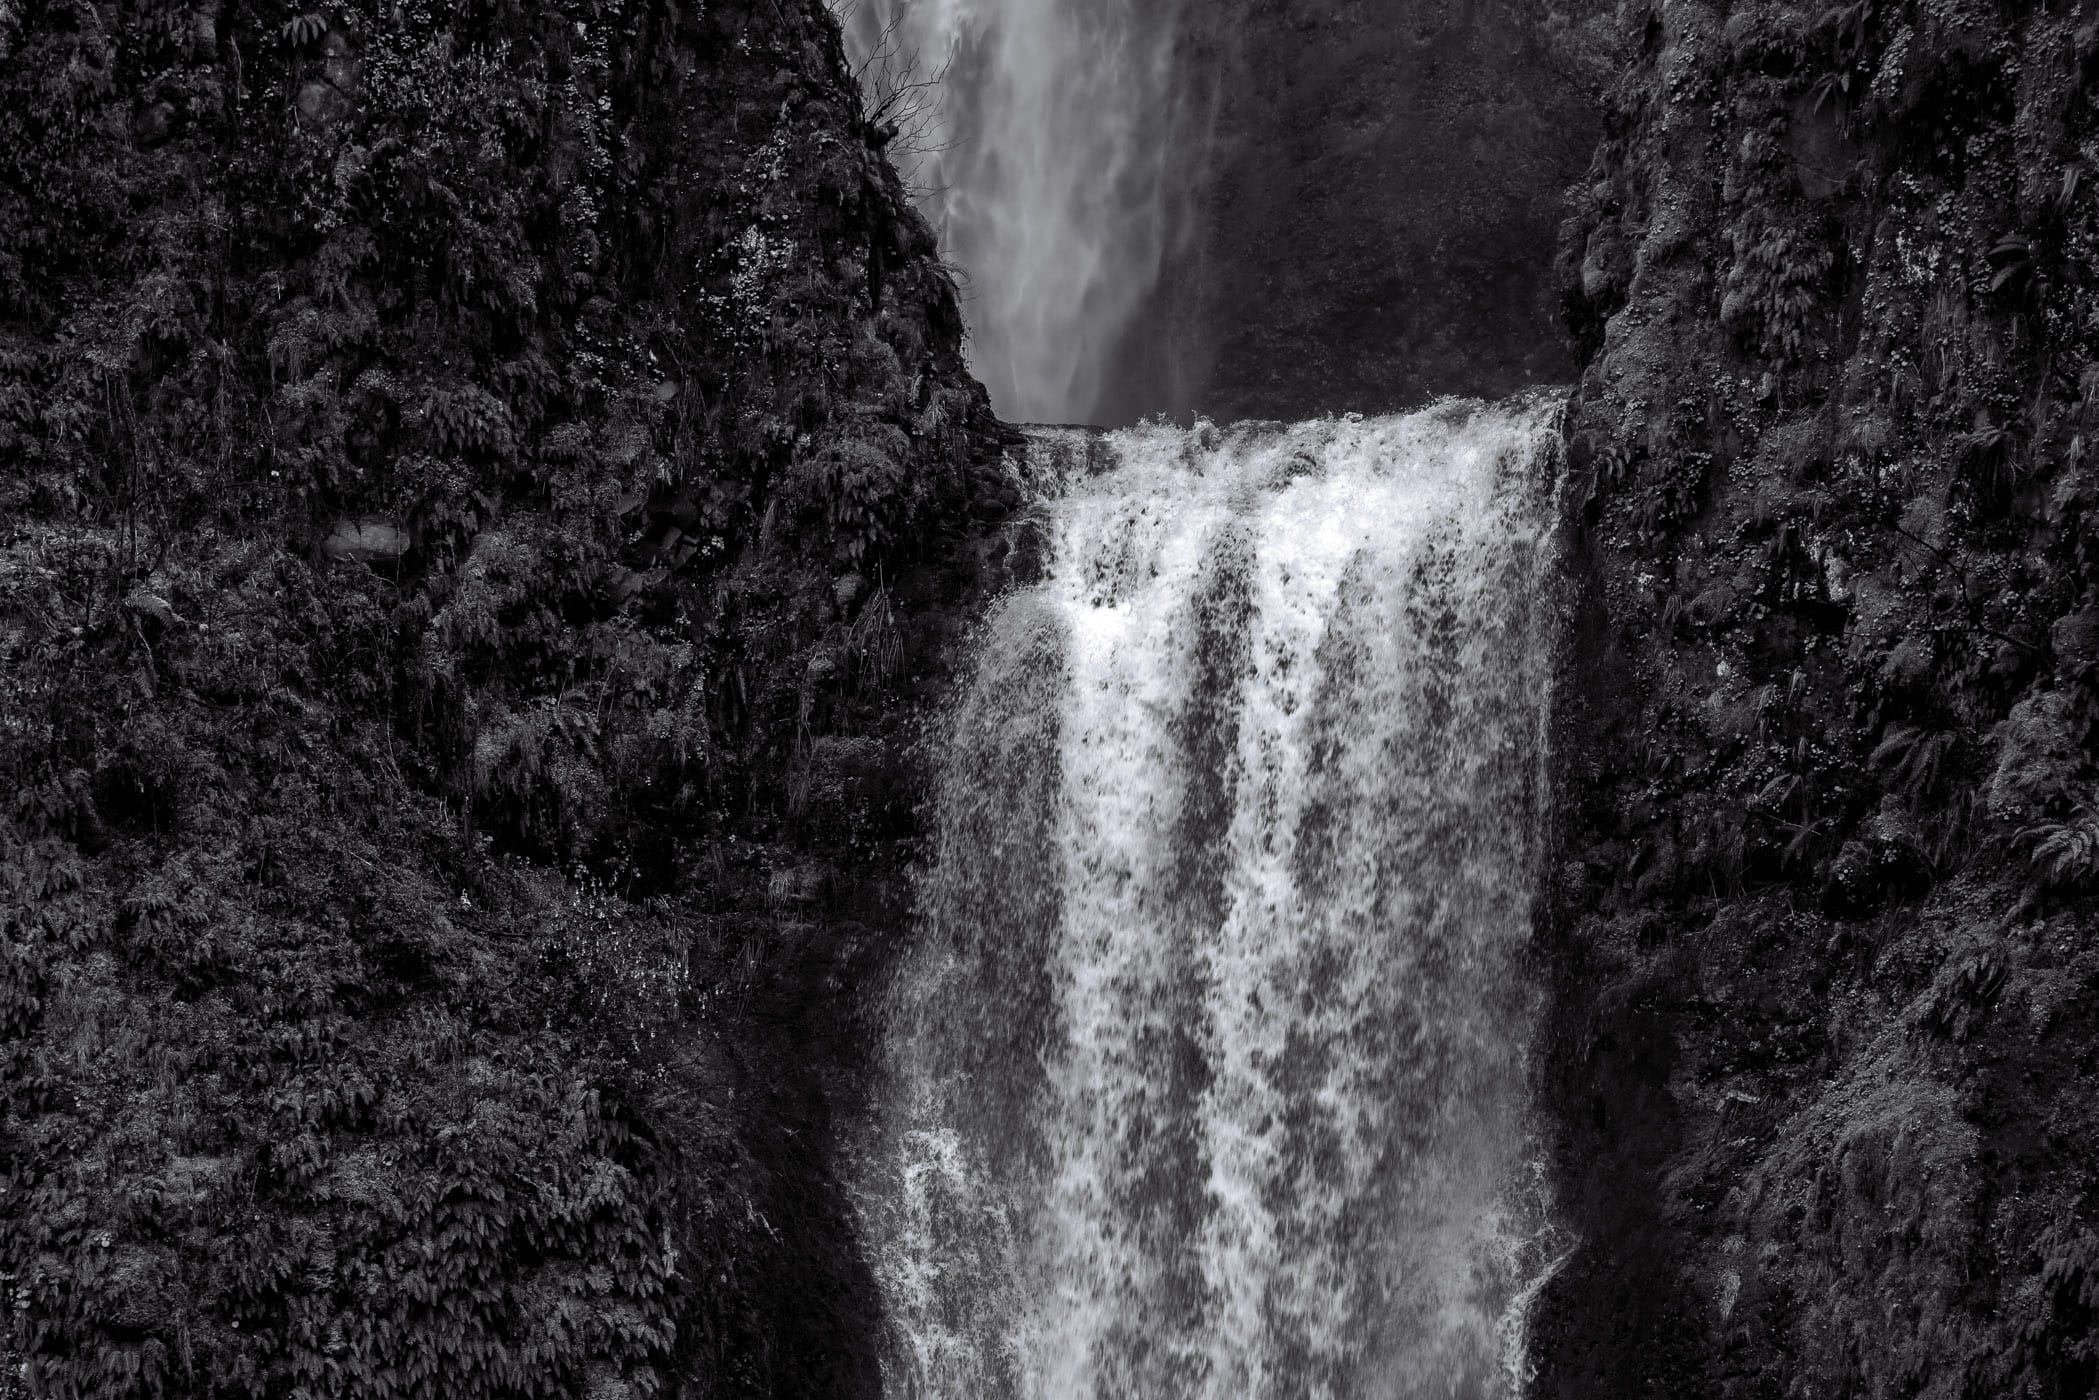 Water flows over the rim of the lower level of Oregon's Multnomah Falls.